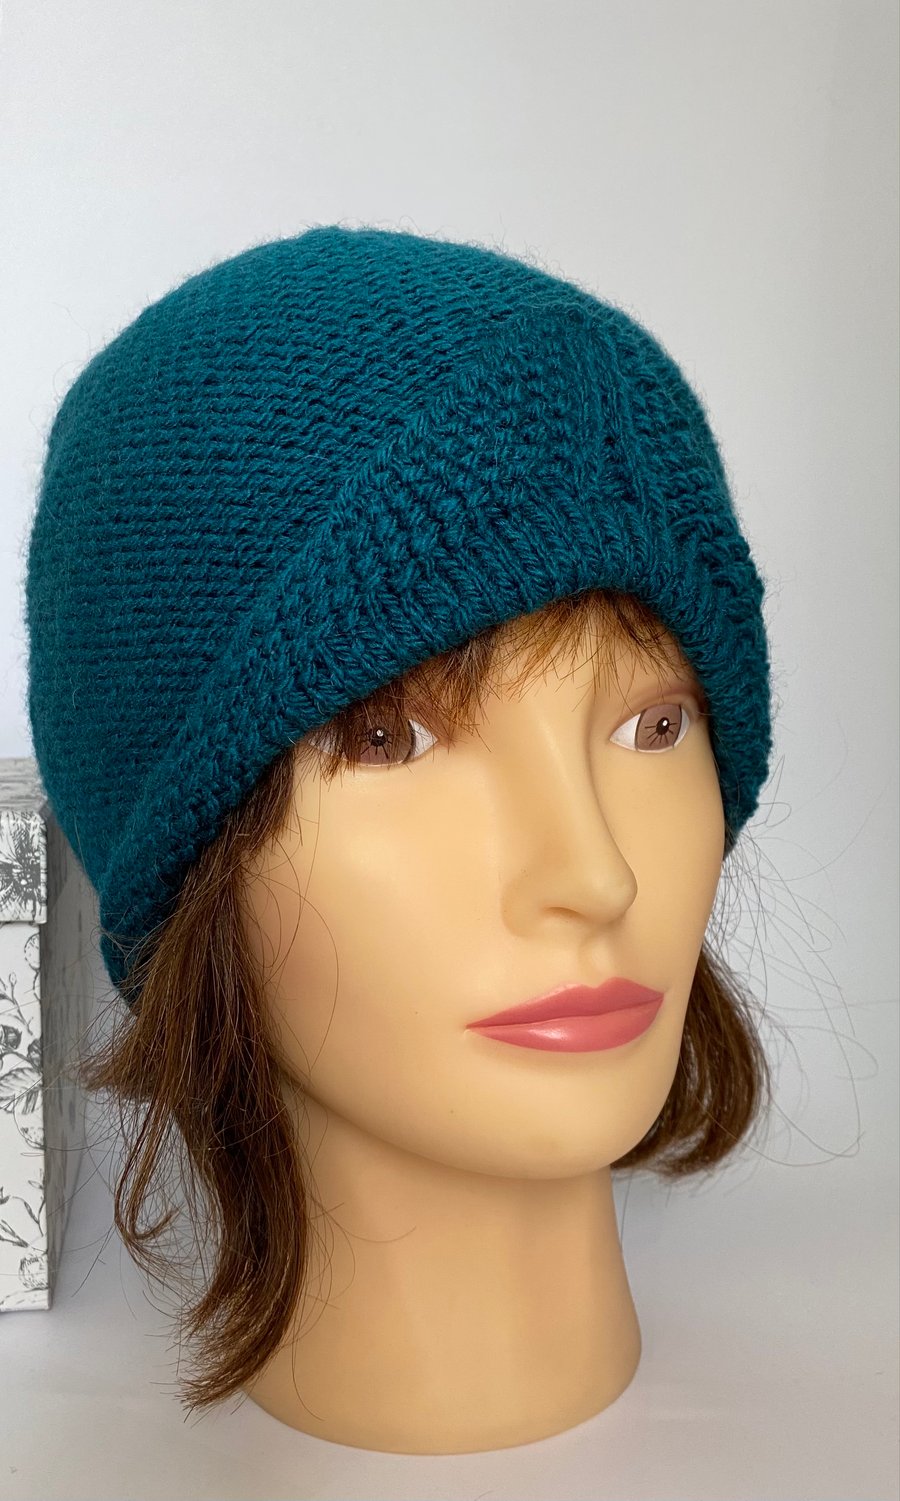 Teal Blue Green Turban 1940s Style Hat Hand knitted Mother's Day Gift Ideas